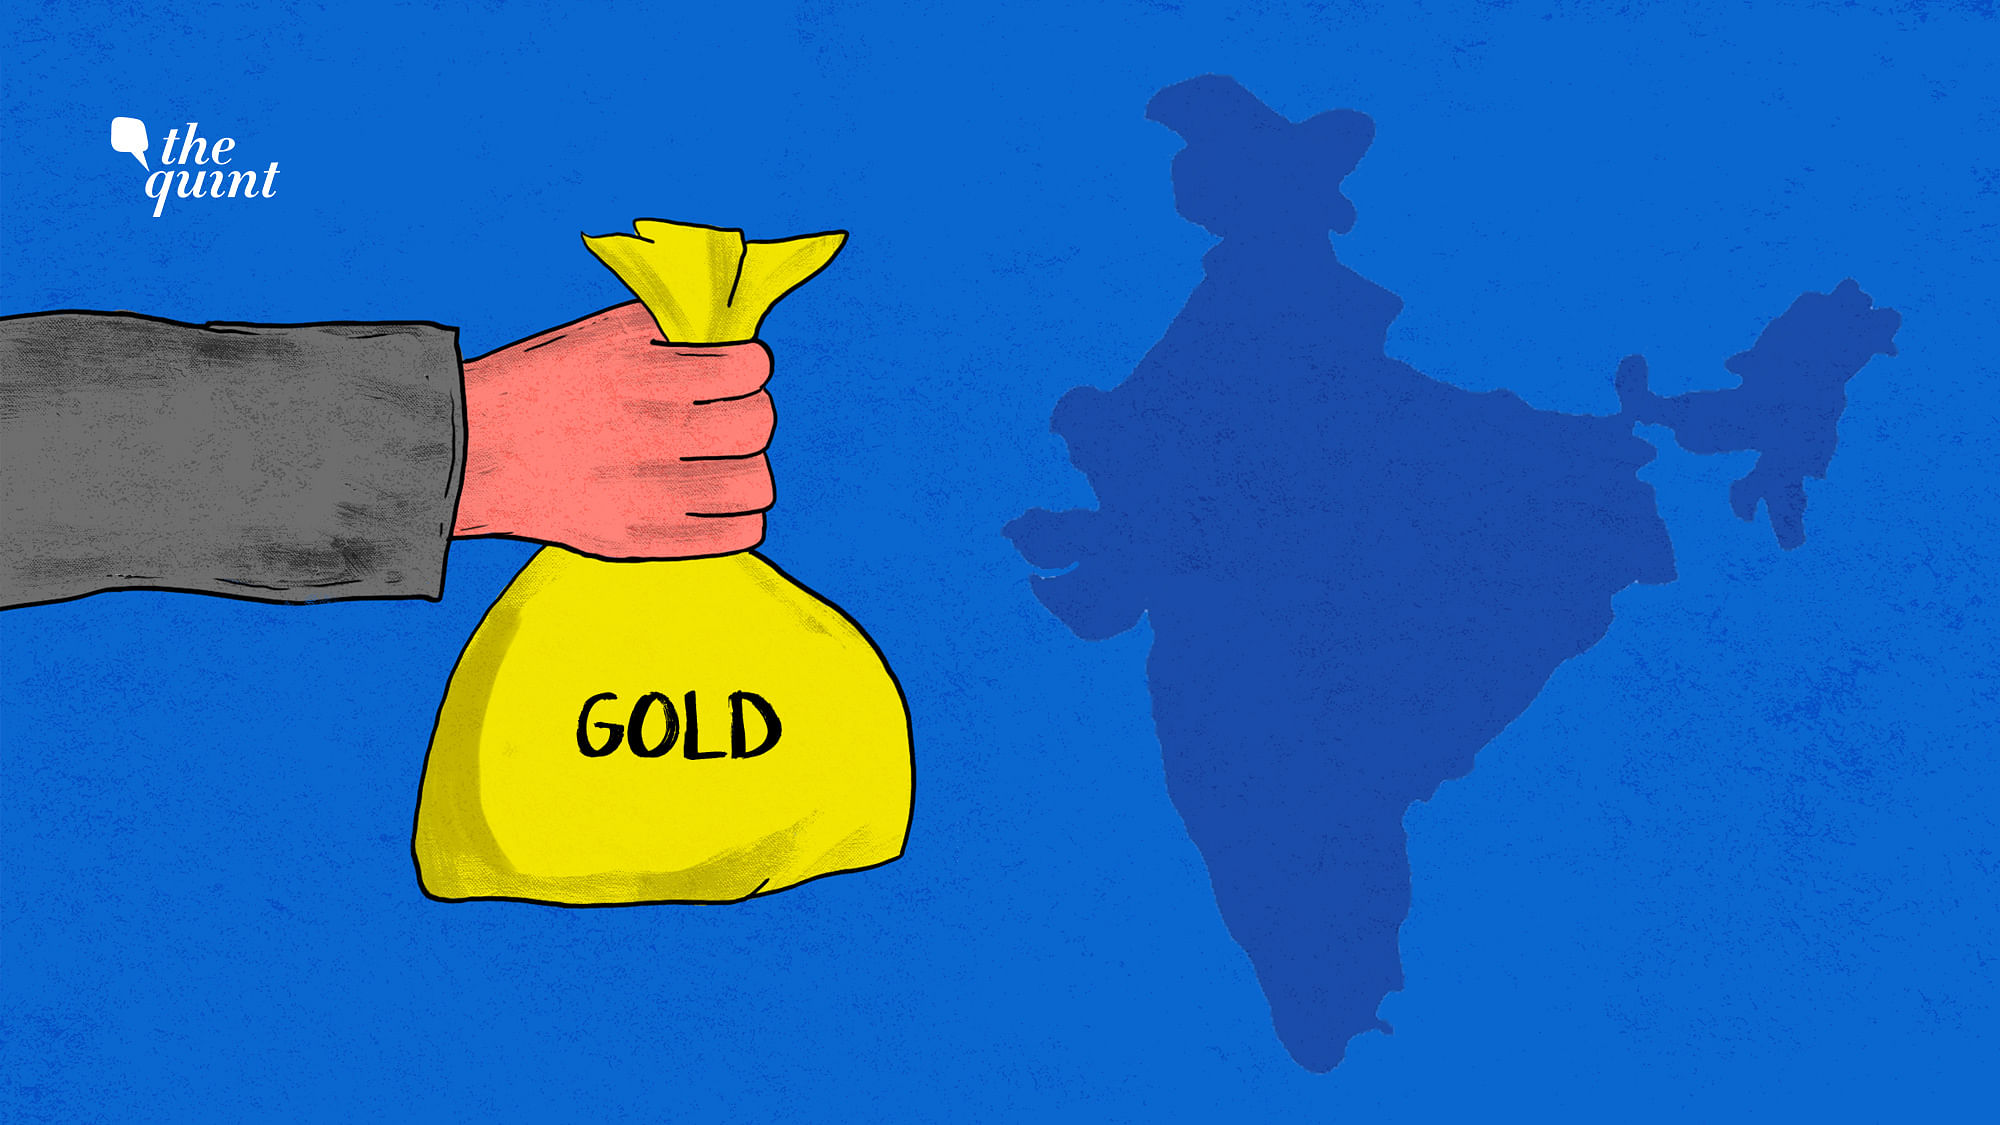 If suitable policy measures are adopted, Bullion Exchange can address multiple issues associated with GMS structure.